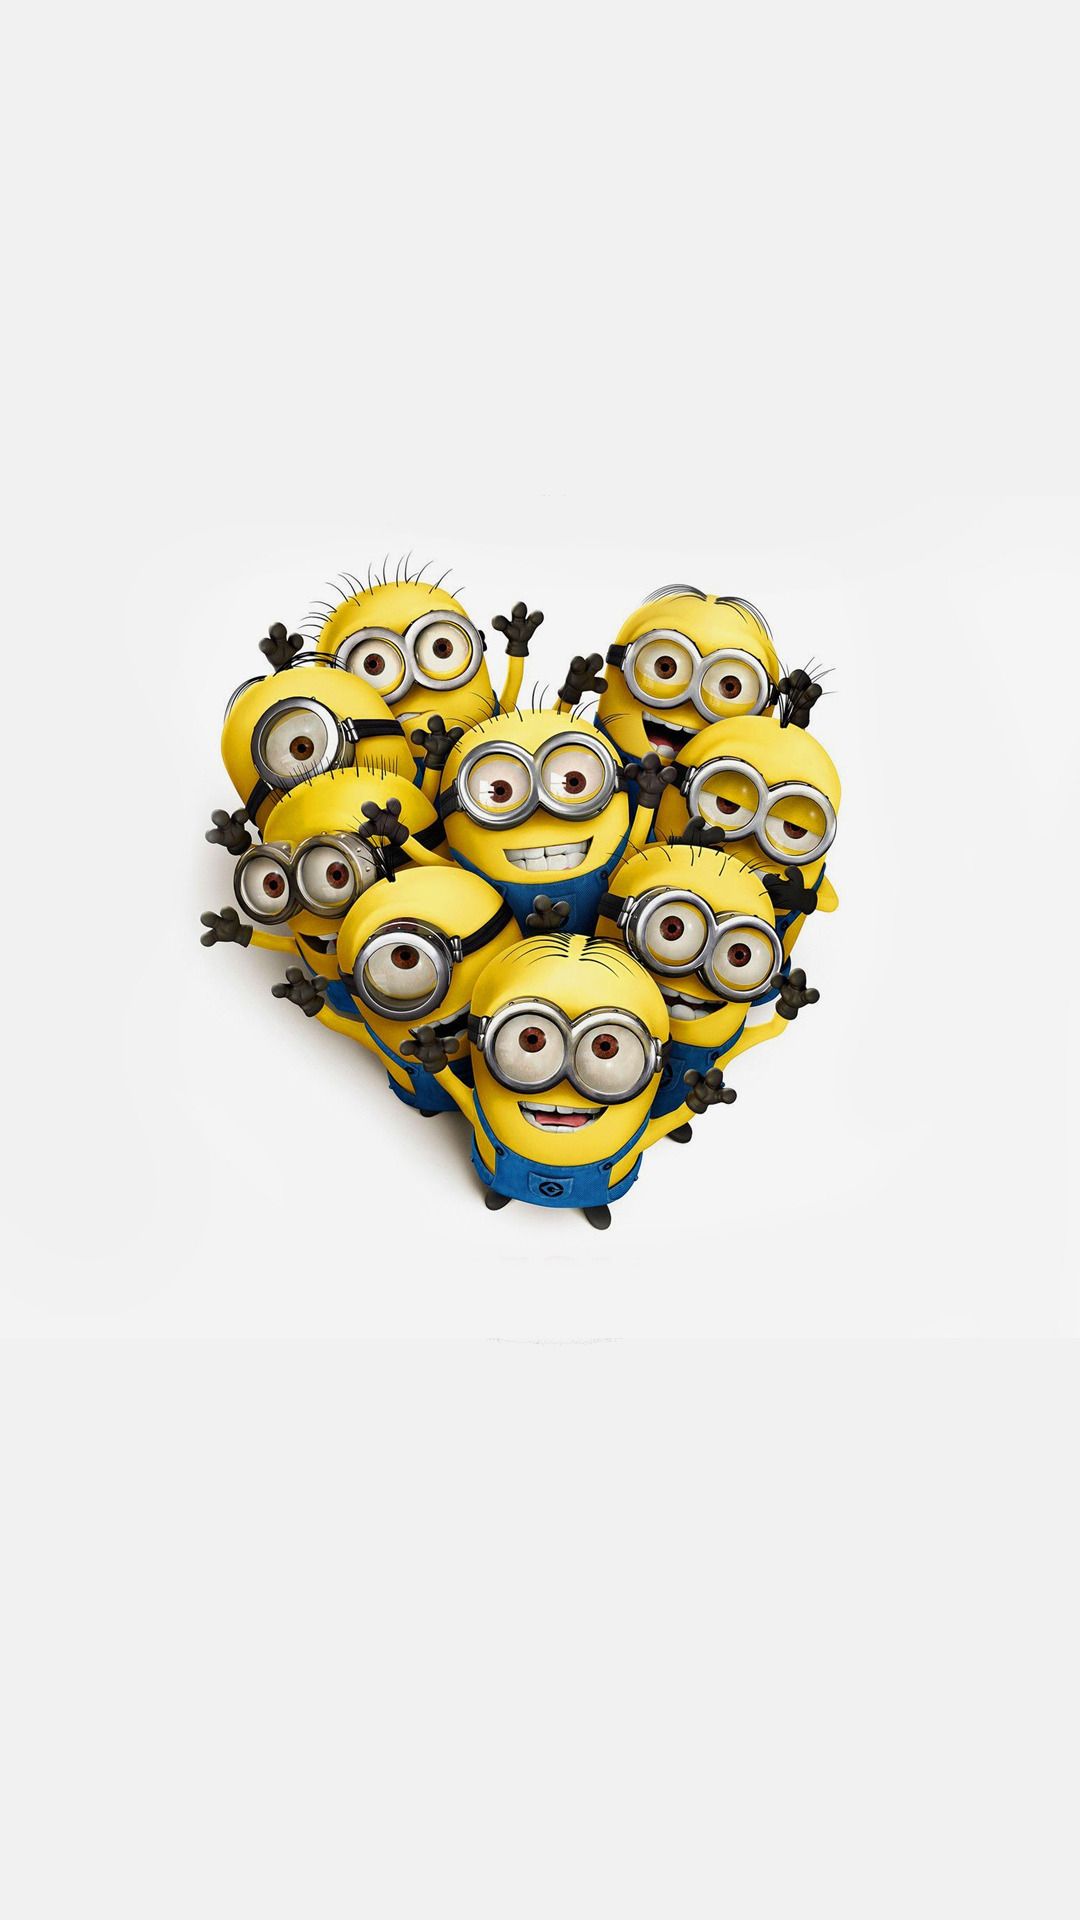 Heart Of Minions IPhone 6 6 Plus And IPhone 5 4 Wallpaper